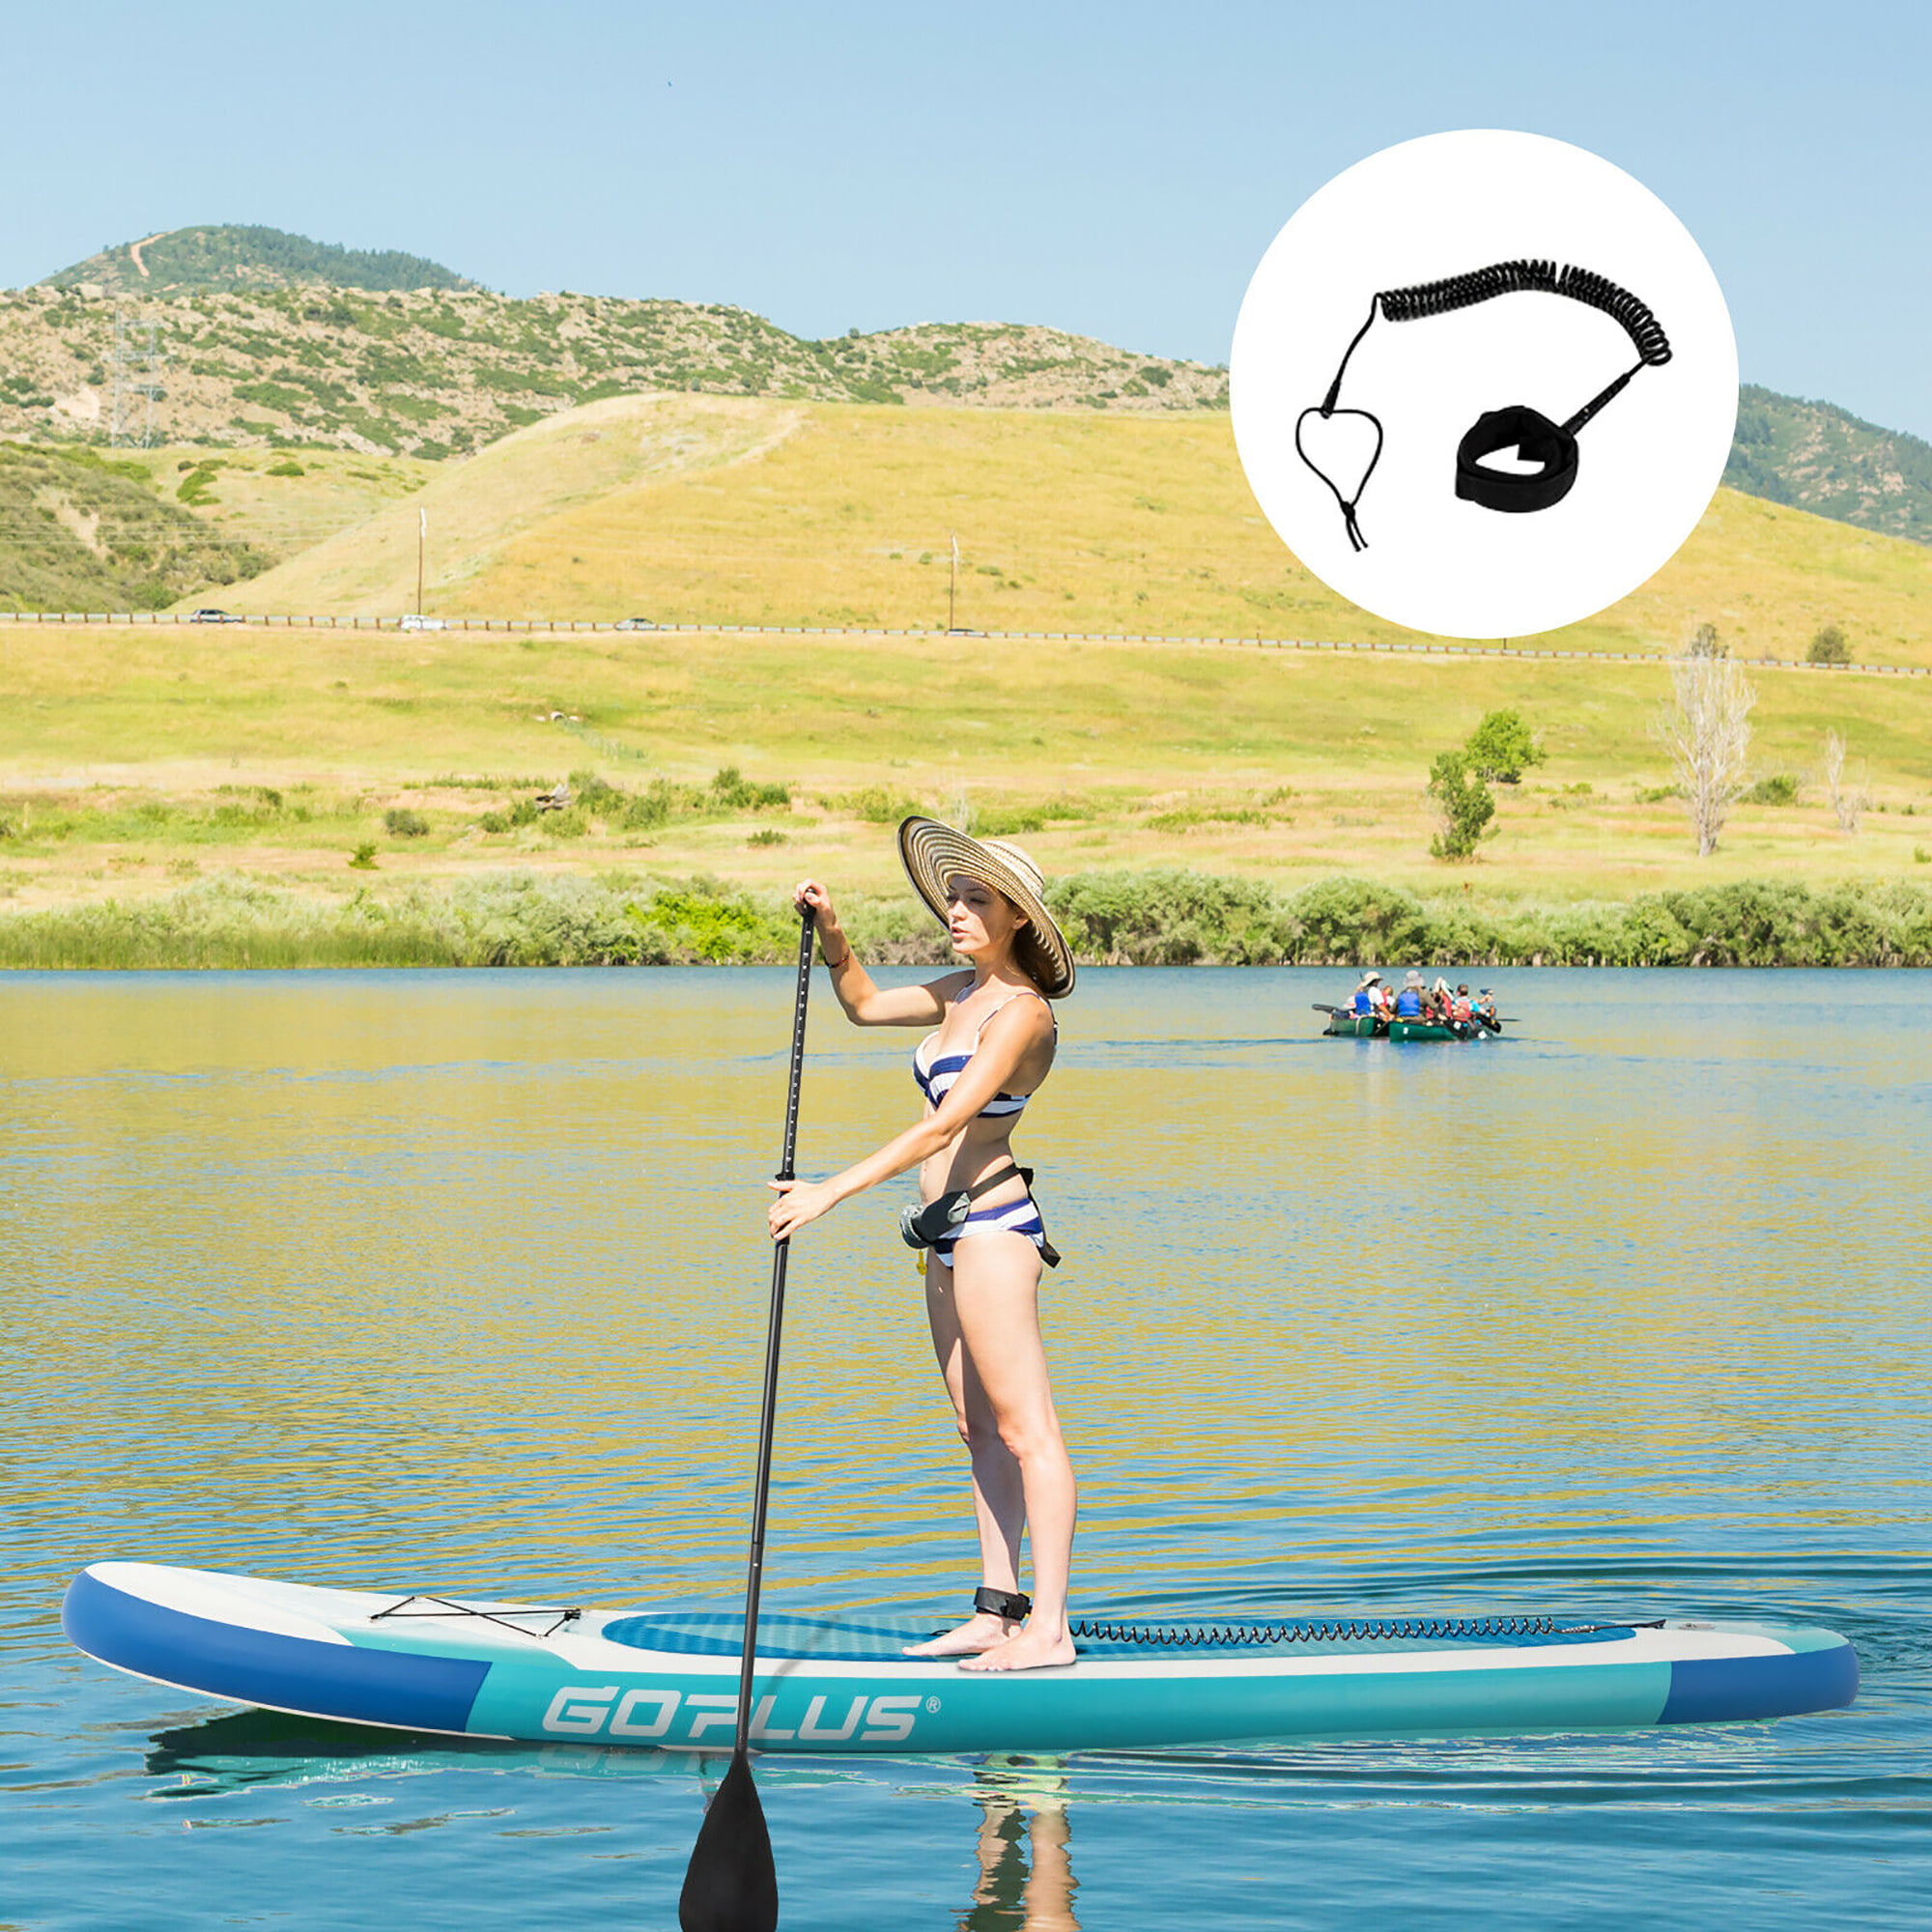 Goplus 10ft Inflatable Stand Up Paddle Board 6'' Thick W/ Aluminum Paddle Leash Backpack - image 5 of 10